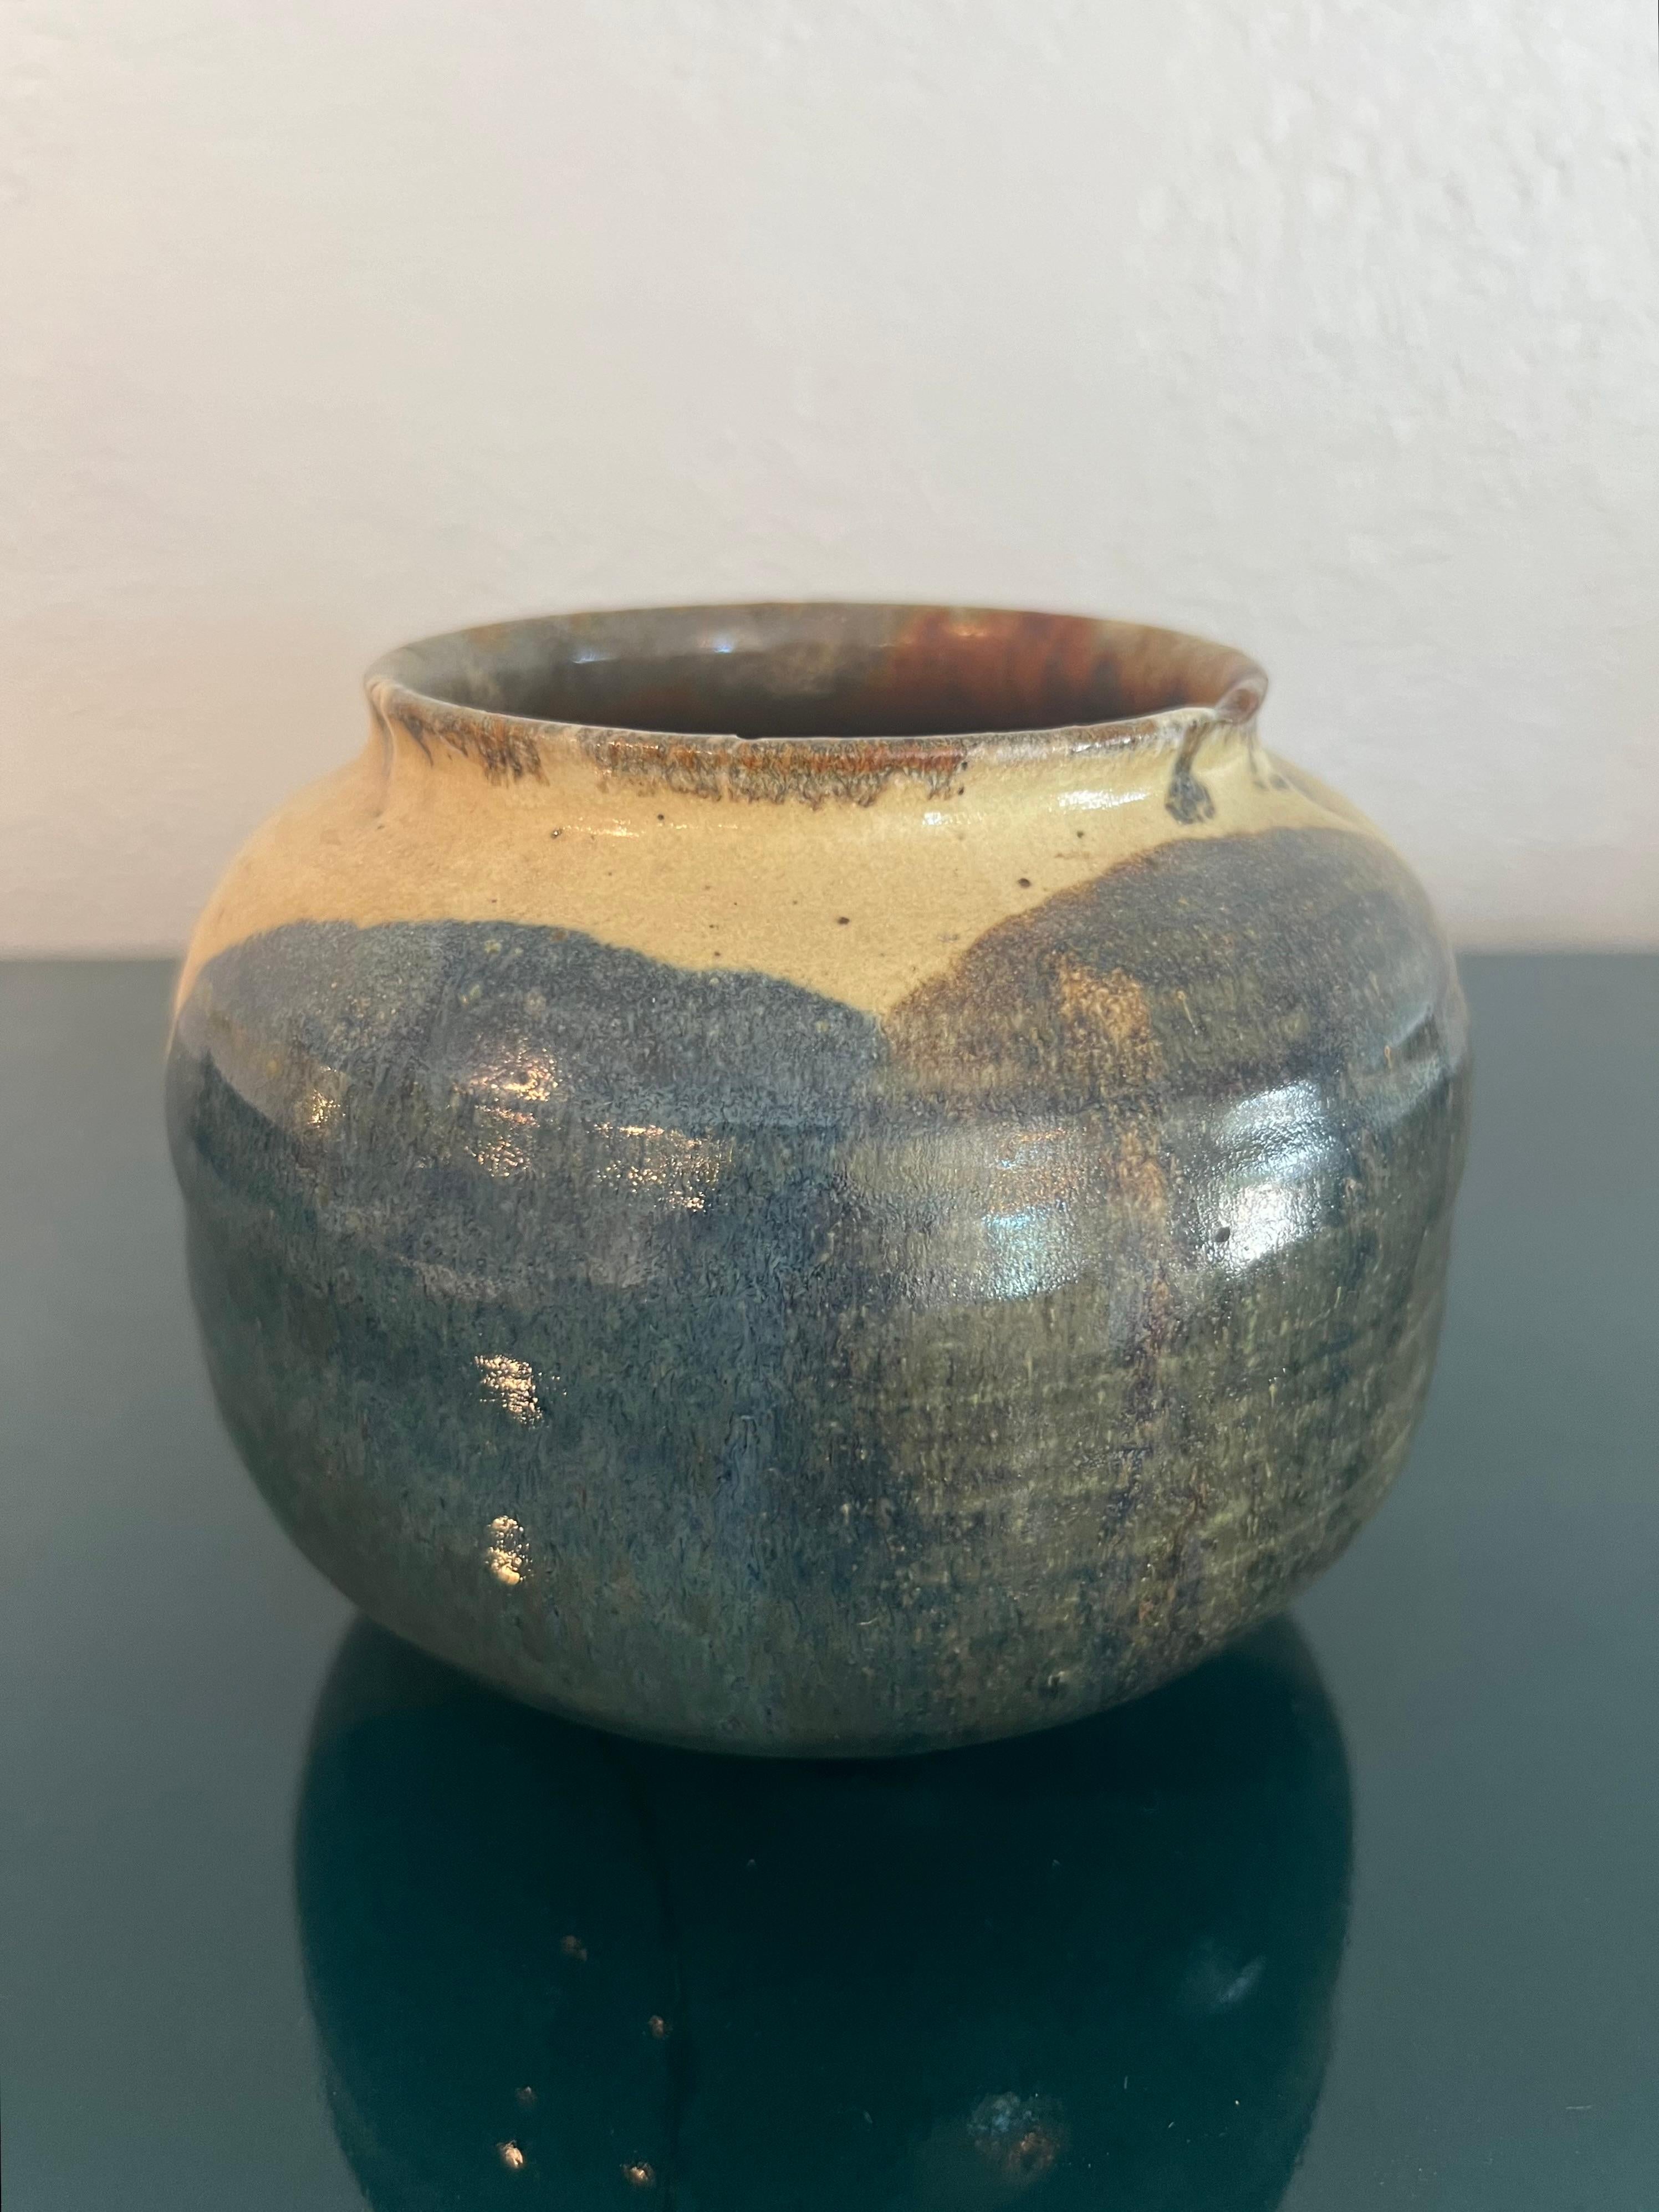 Signed studio pottery glazed pot. Intentional indentation on the rim as it is underneath the glazed finish.

Would work well in a variety of interiors such as modern, mid century modern, Hollywood regency, etc. Piece blends seamlessly with other